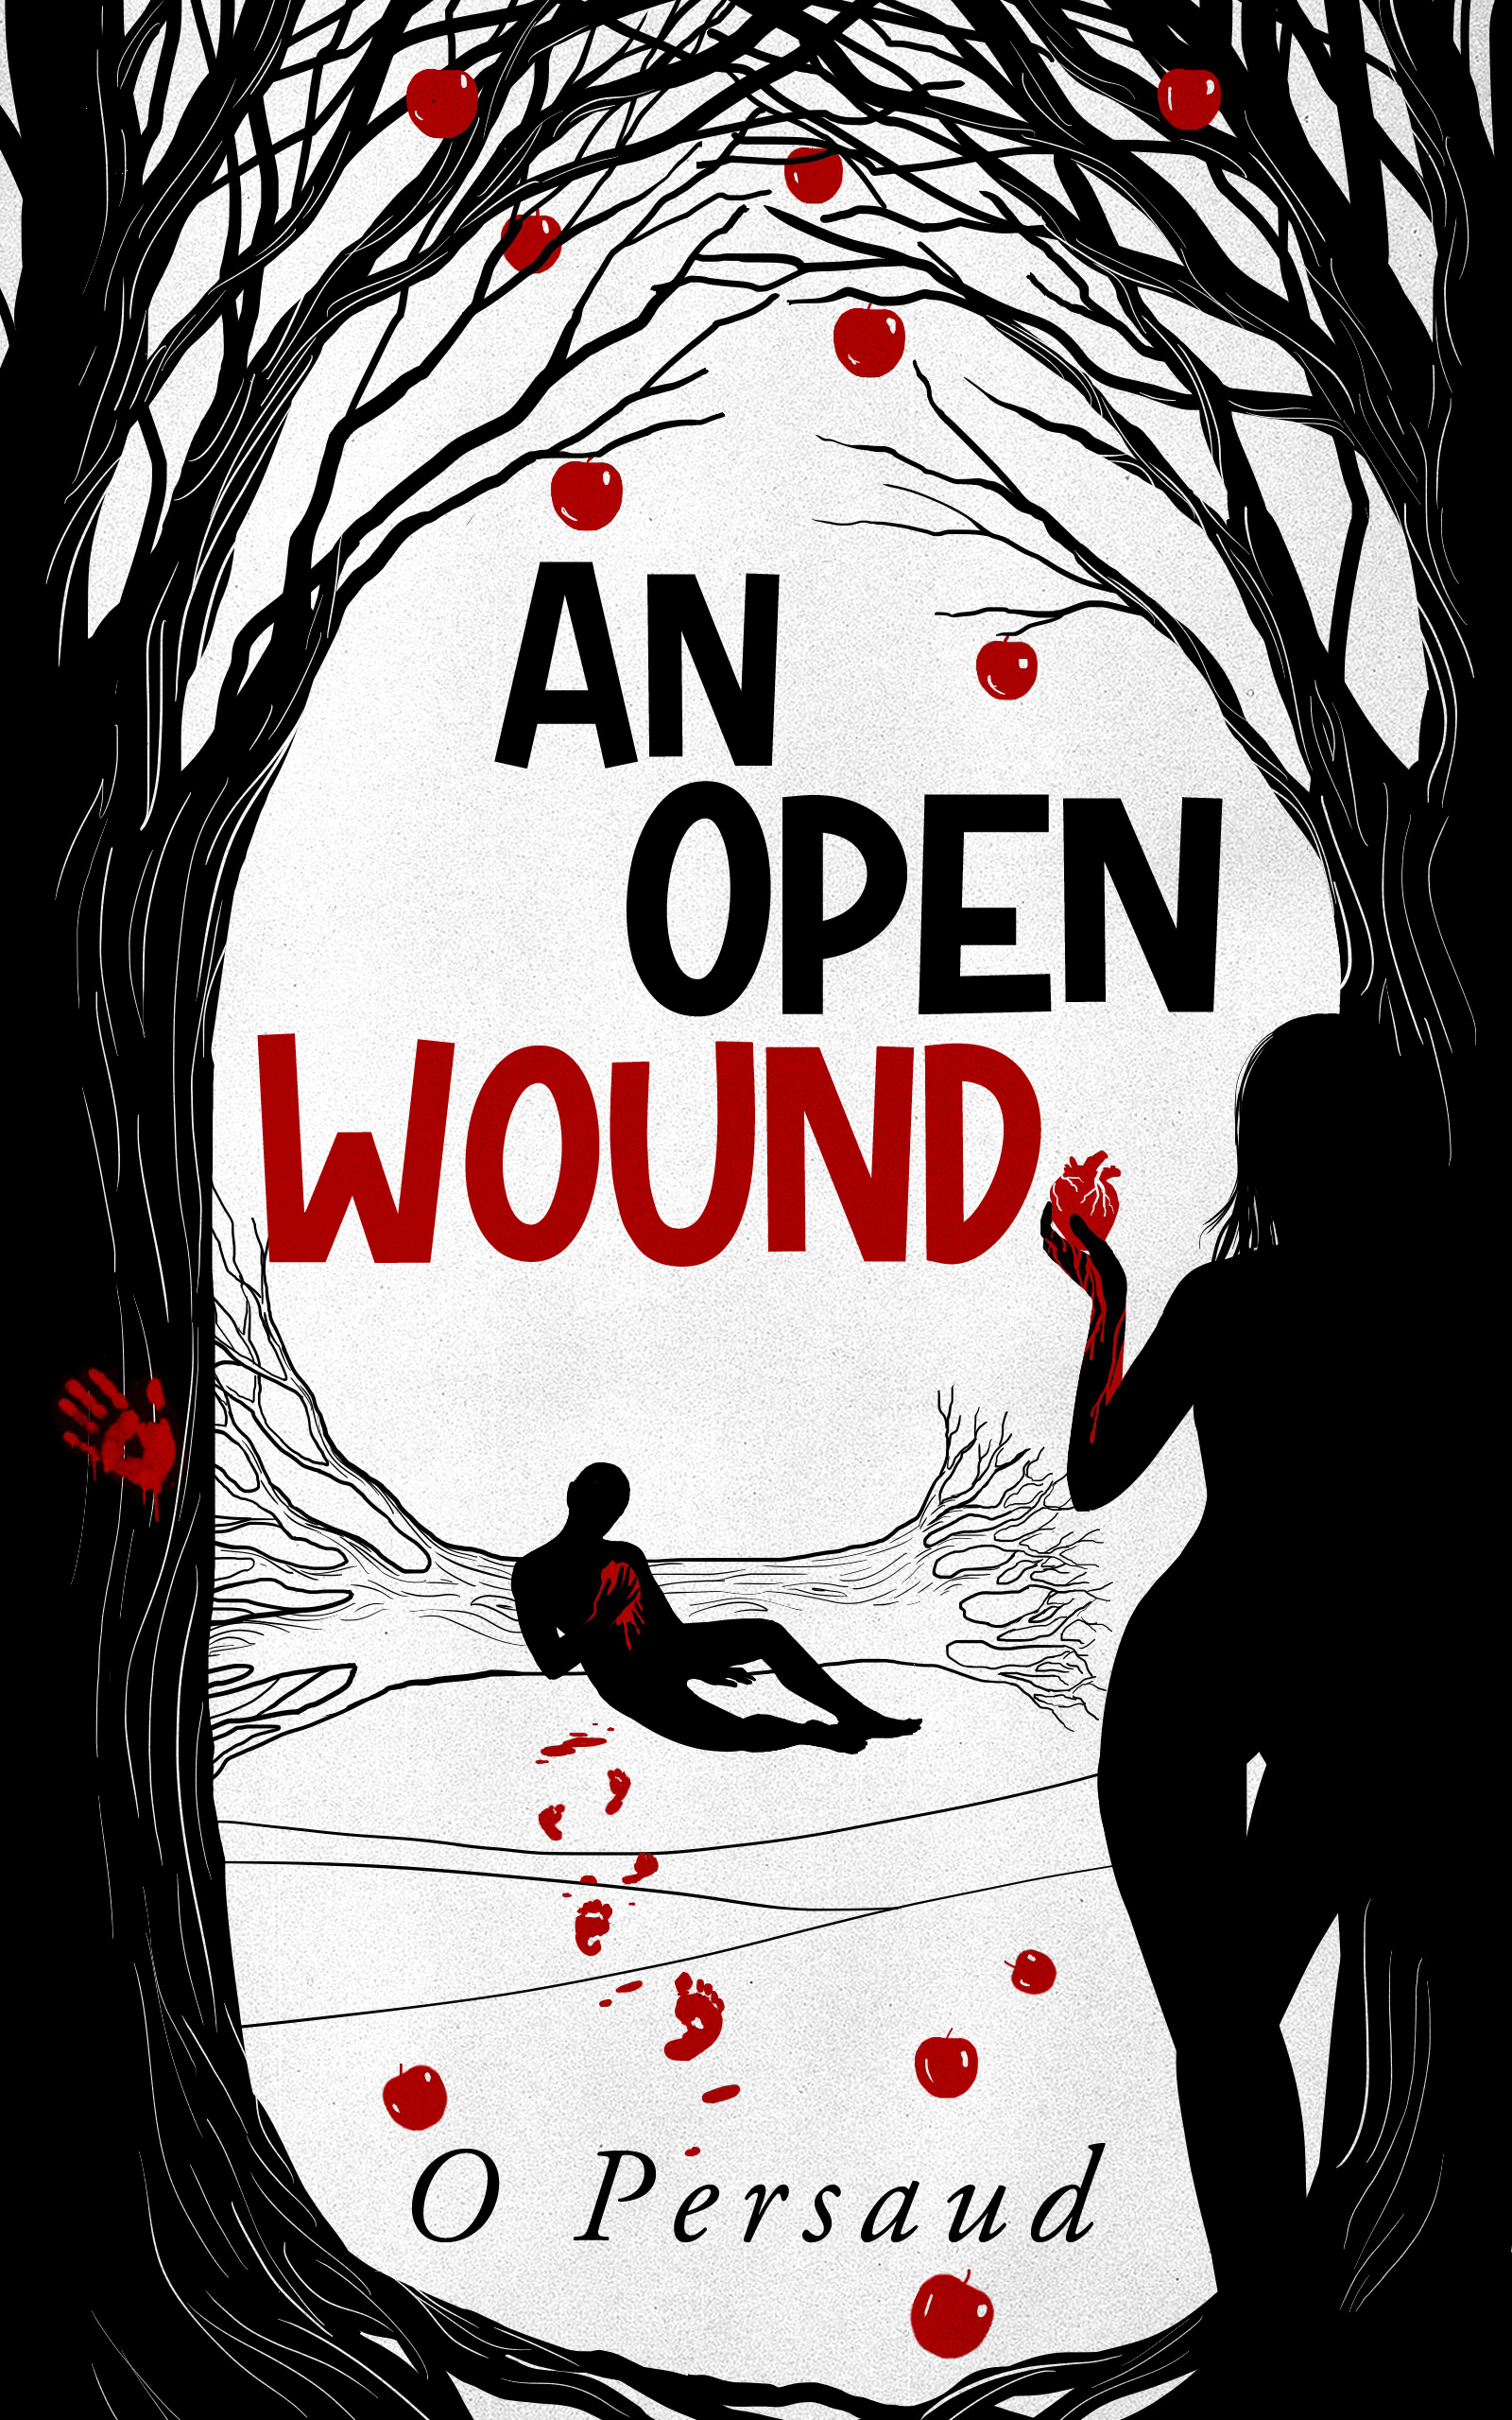 FREE: An Open Wound by Omar Persaud